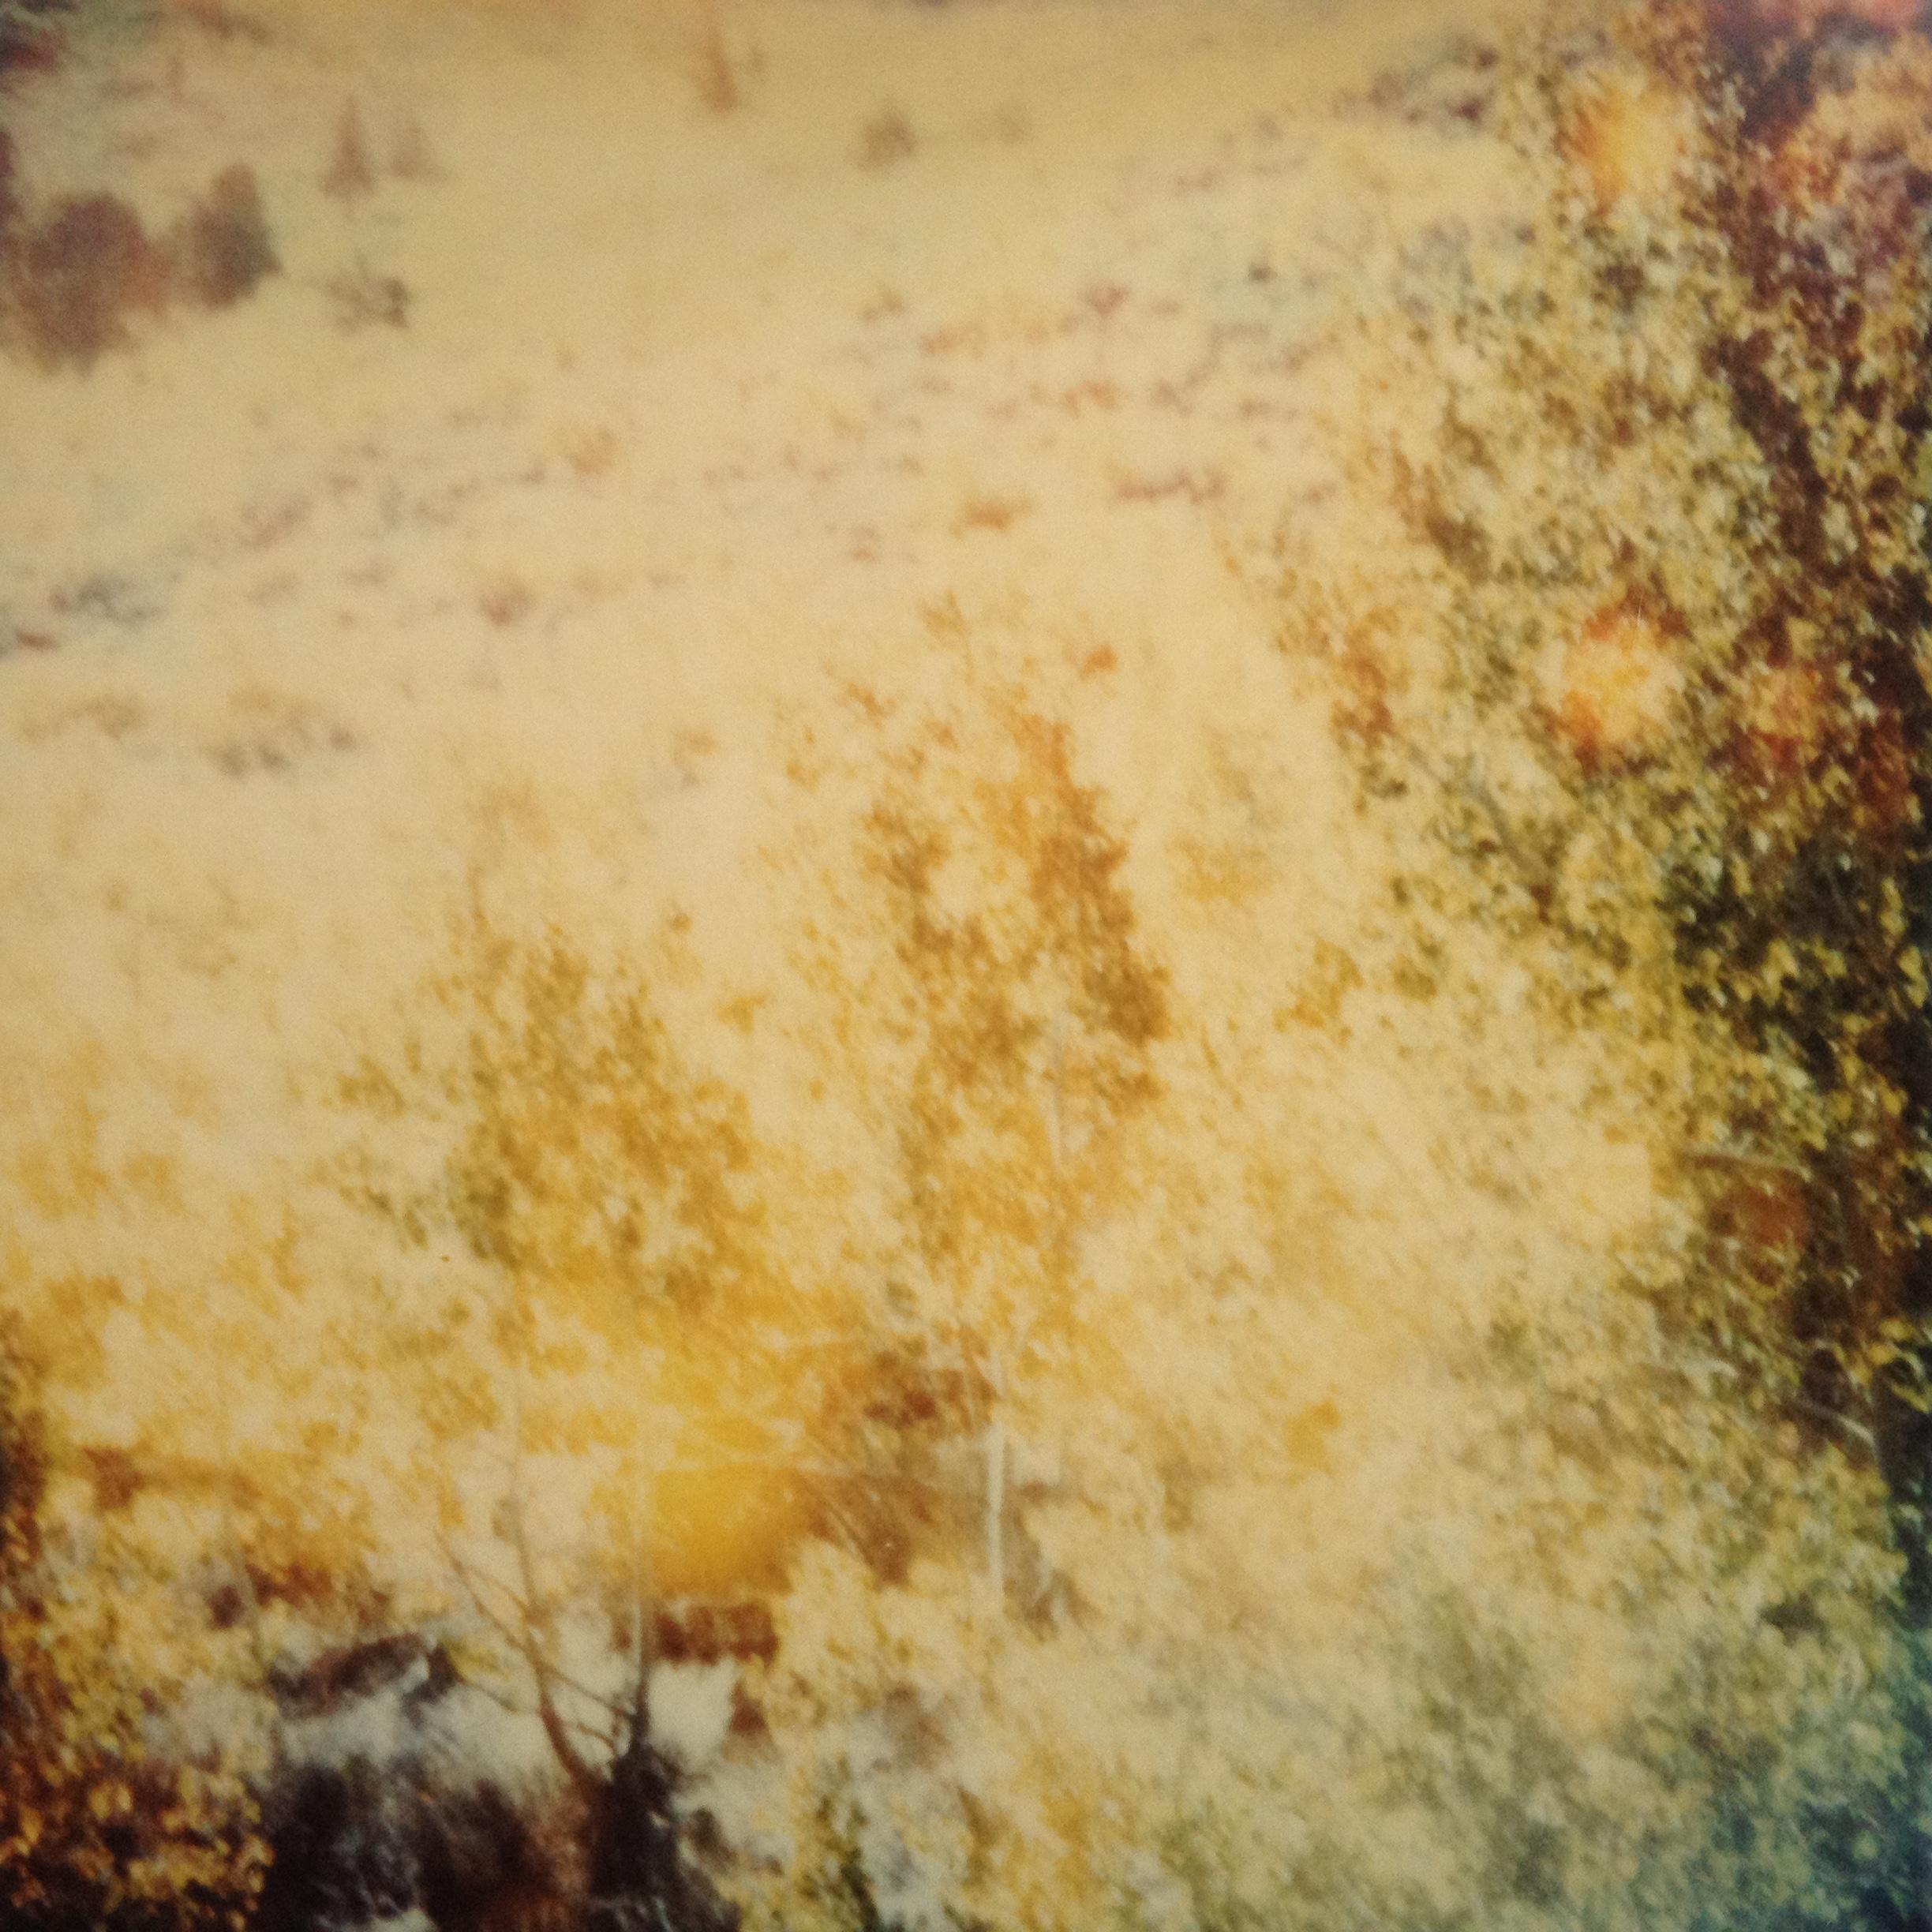 Indian Summer - The Last Picture Show, analog, 58x56cm - Contemporary Photograph by Stefanie Schneider